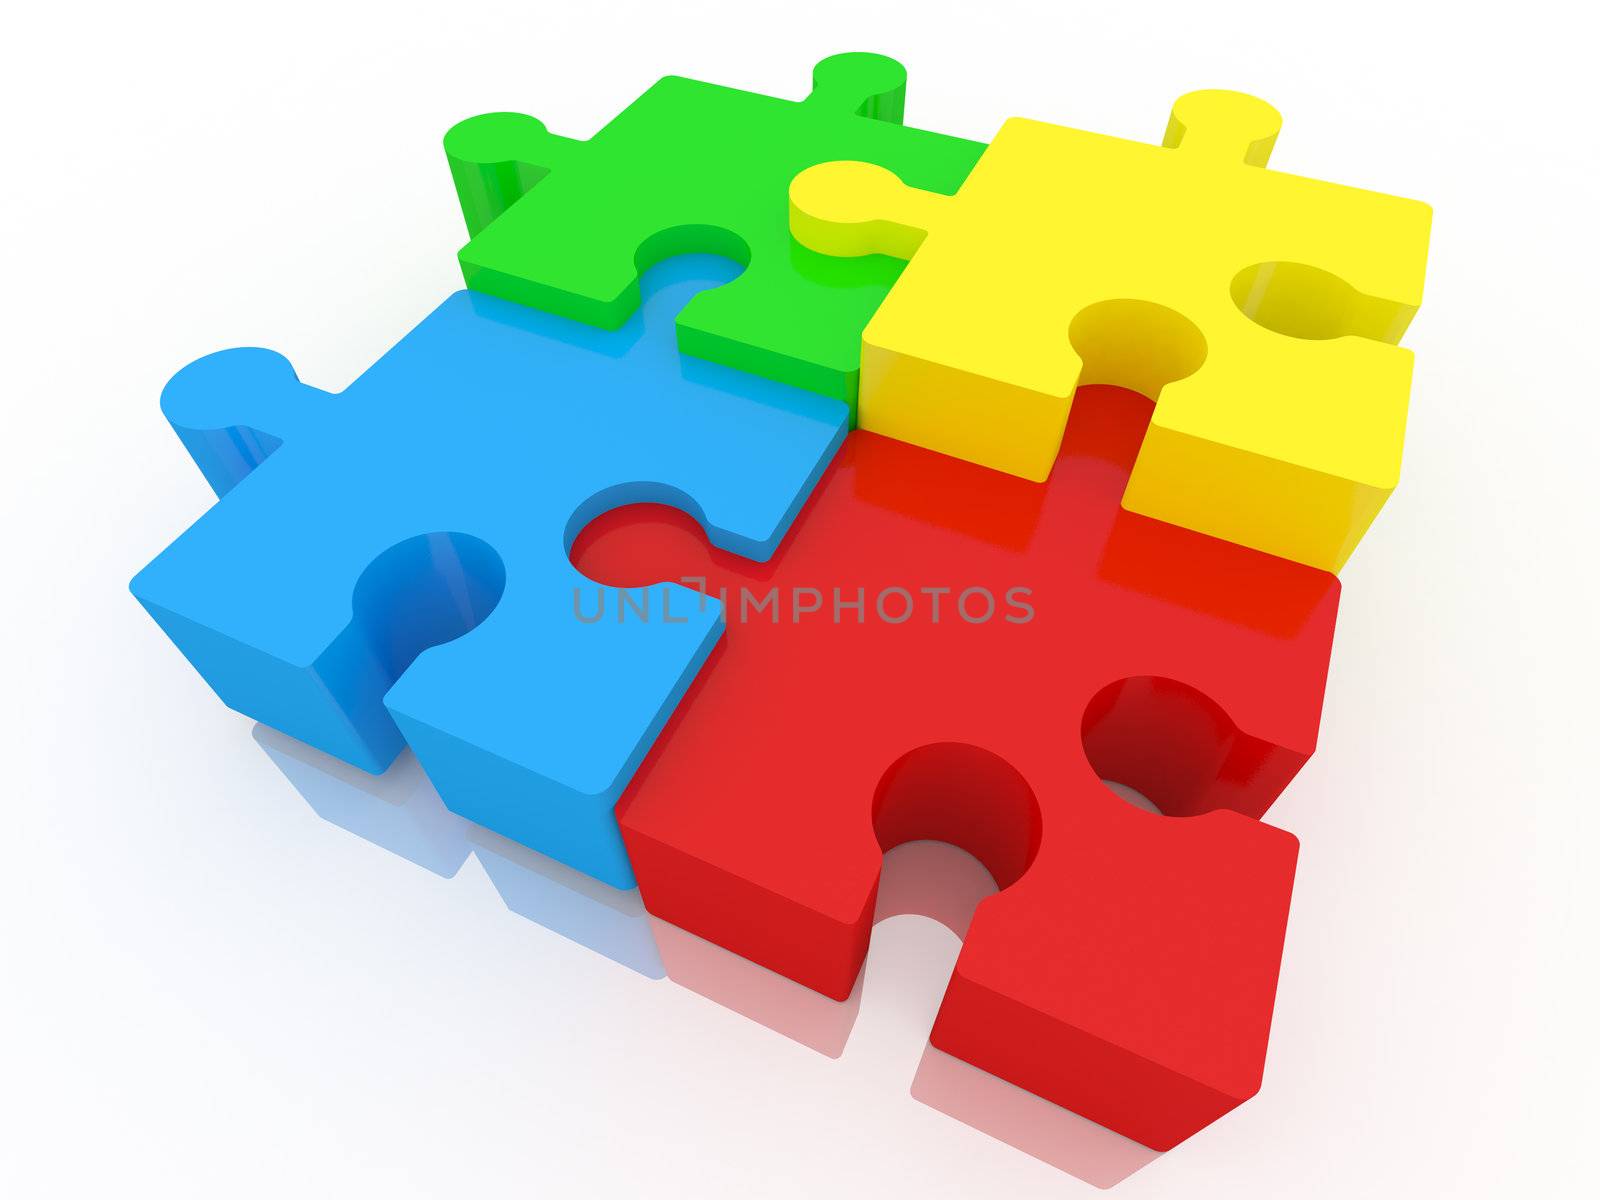 Blue, yellow, green,red puzzle on white background with reflection